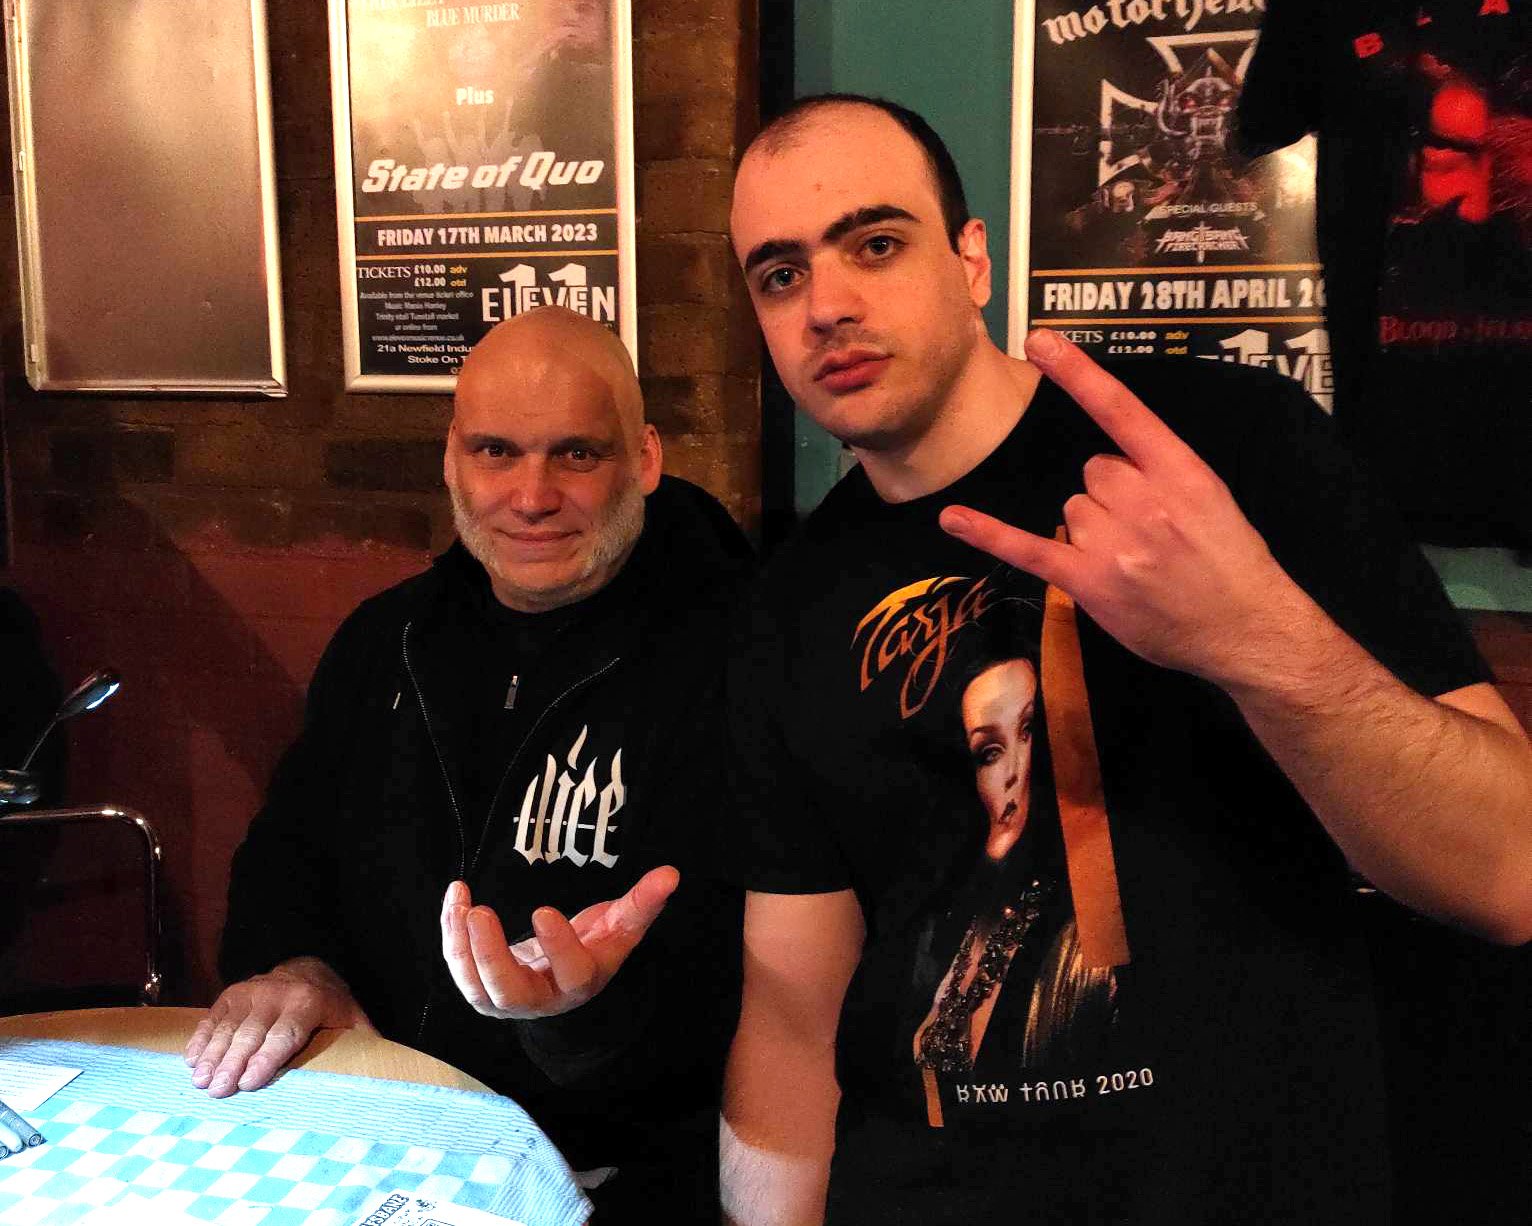  Our Pedro free Meet and Greet with Blaze Bayley in Stoke on March 19th 2023 